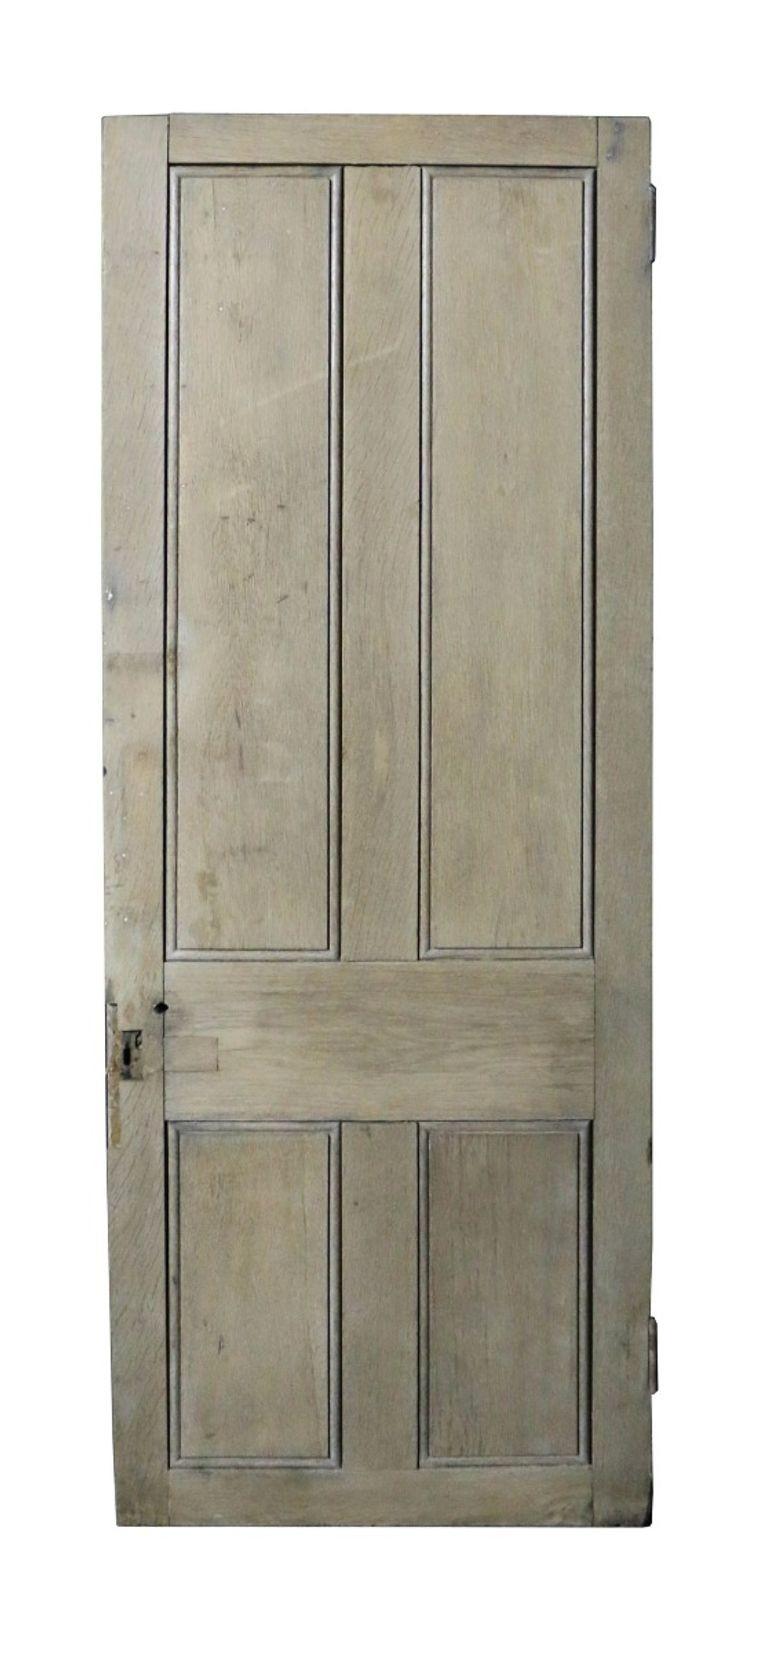 A reclaimed oak door, of four panel configuration. Suitable for interior or exterior use.